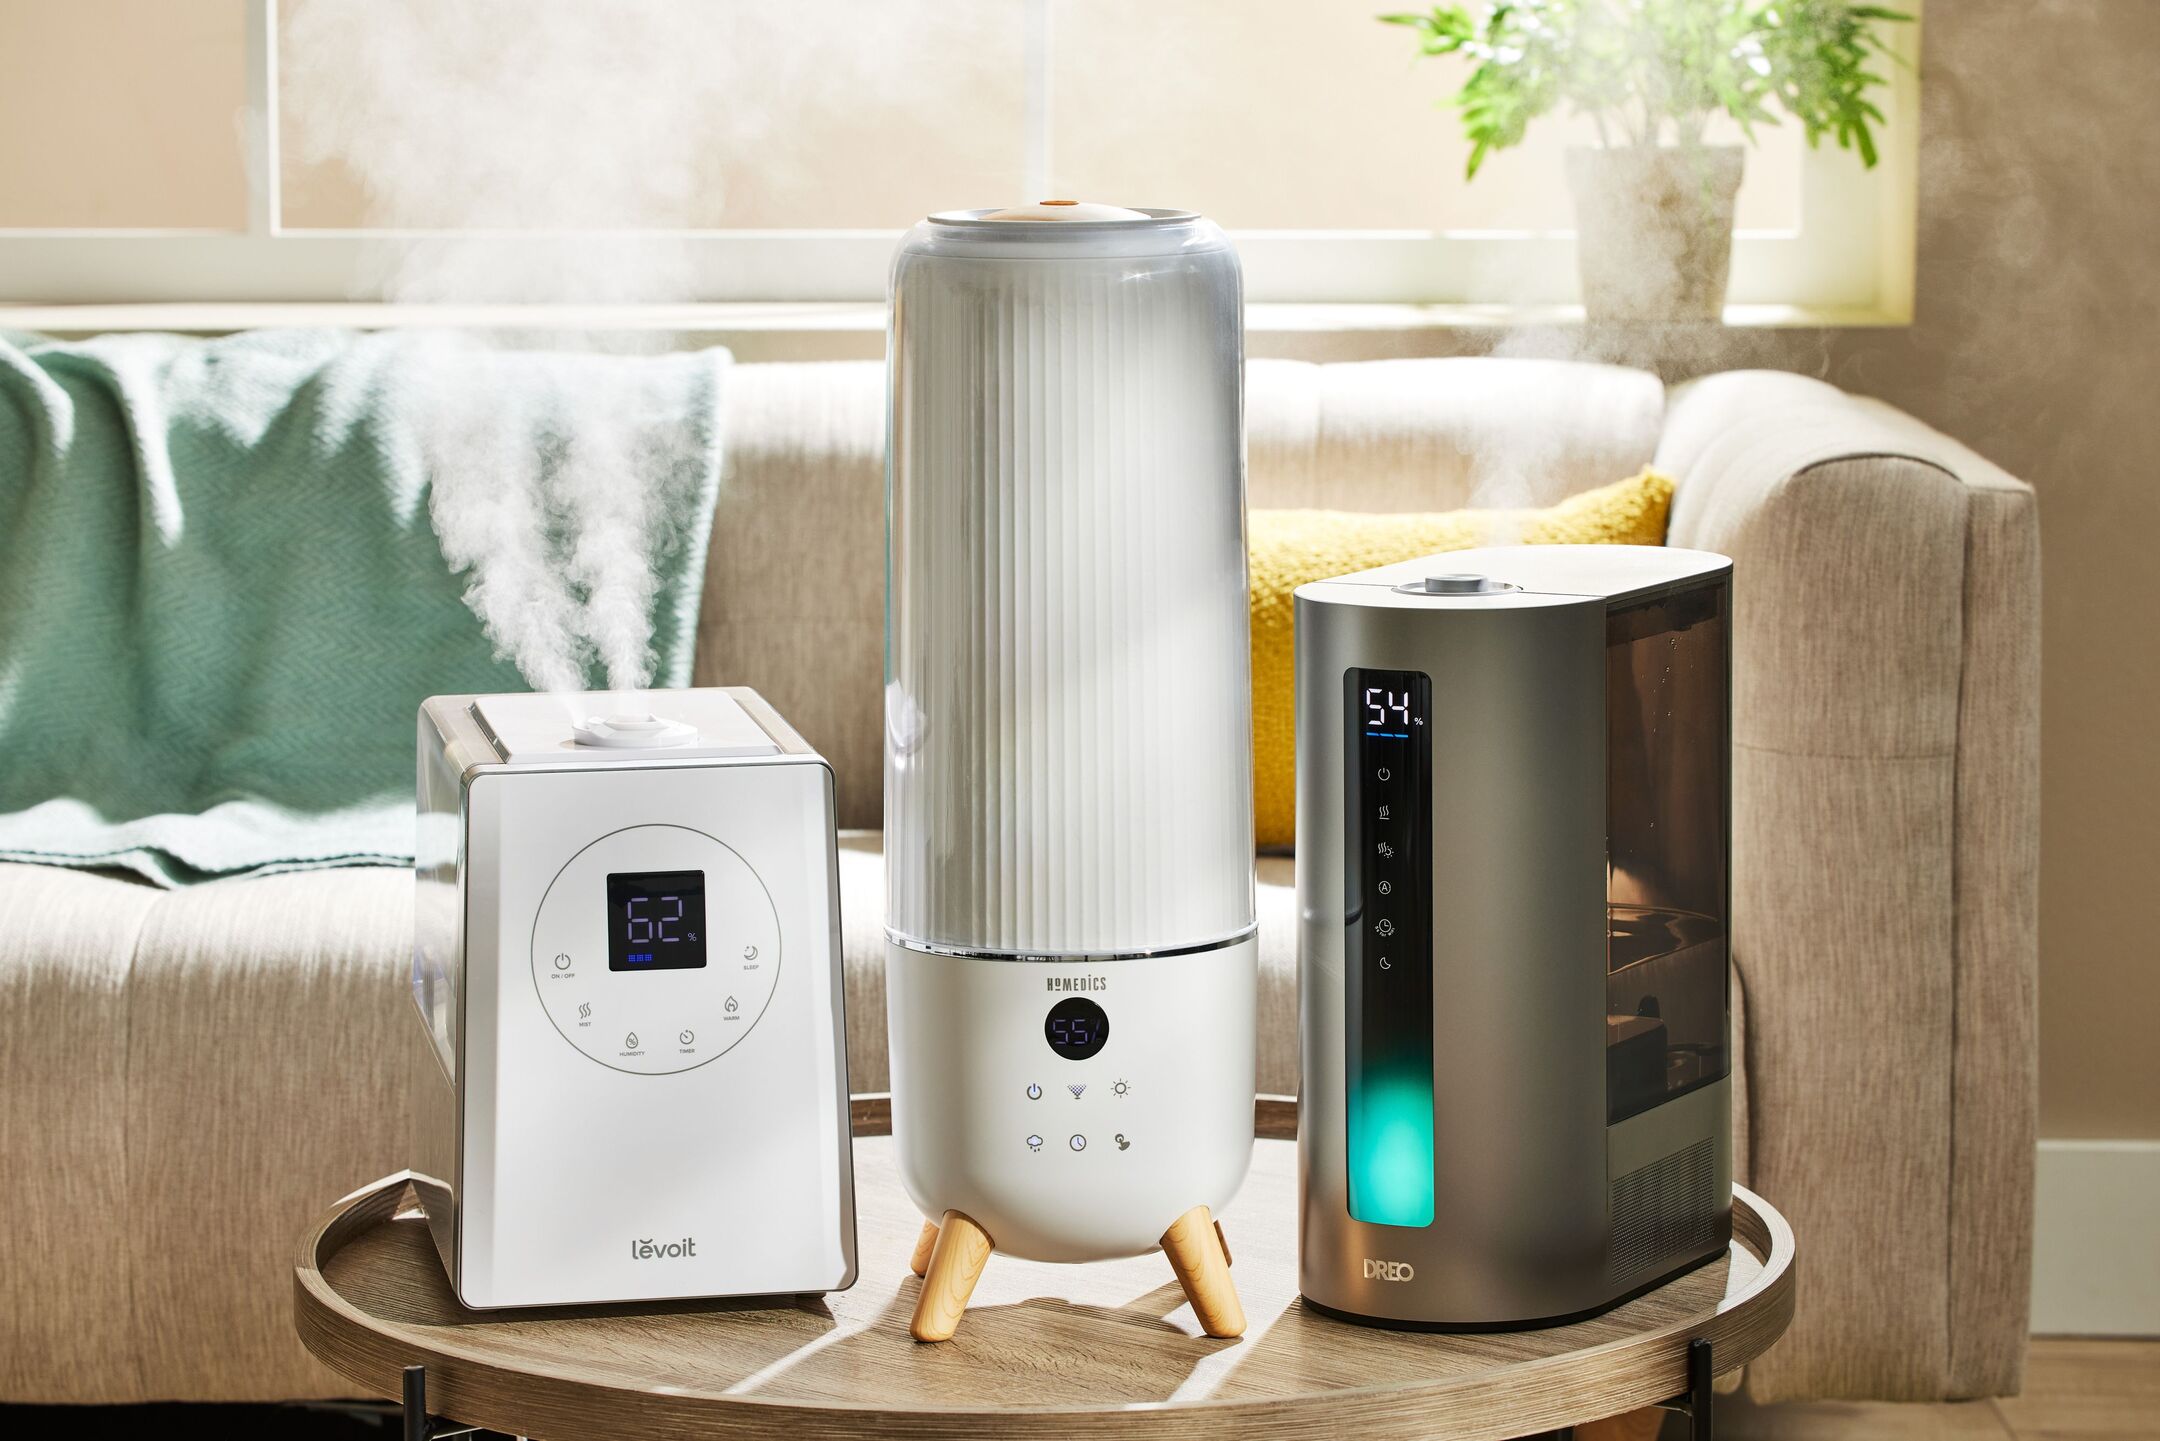 Top Humidifier Review: Find the Best Option for Your Home